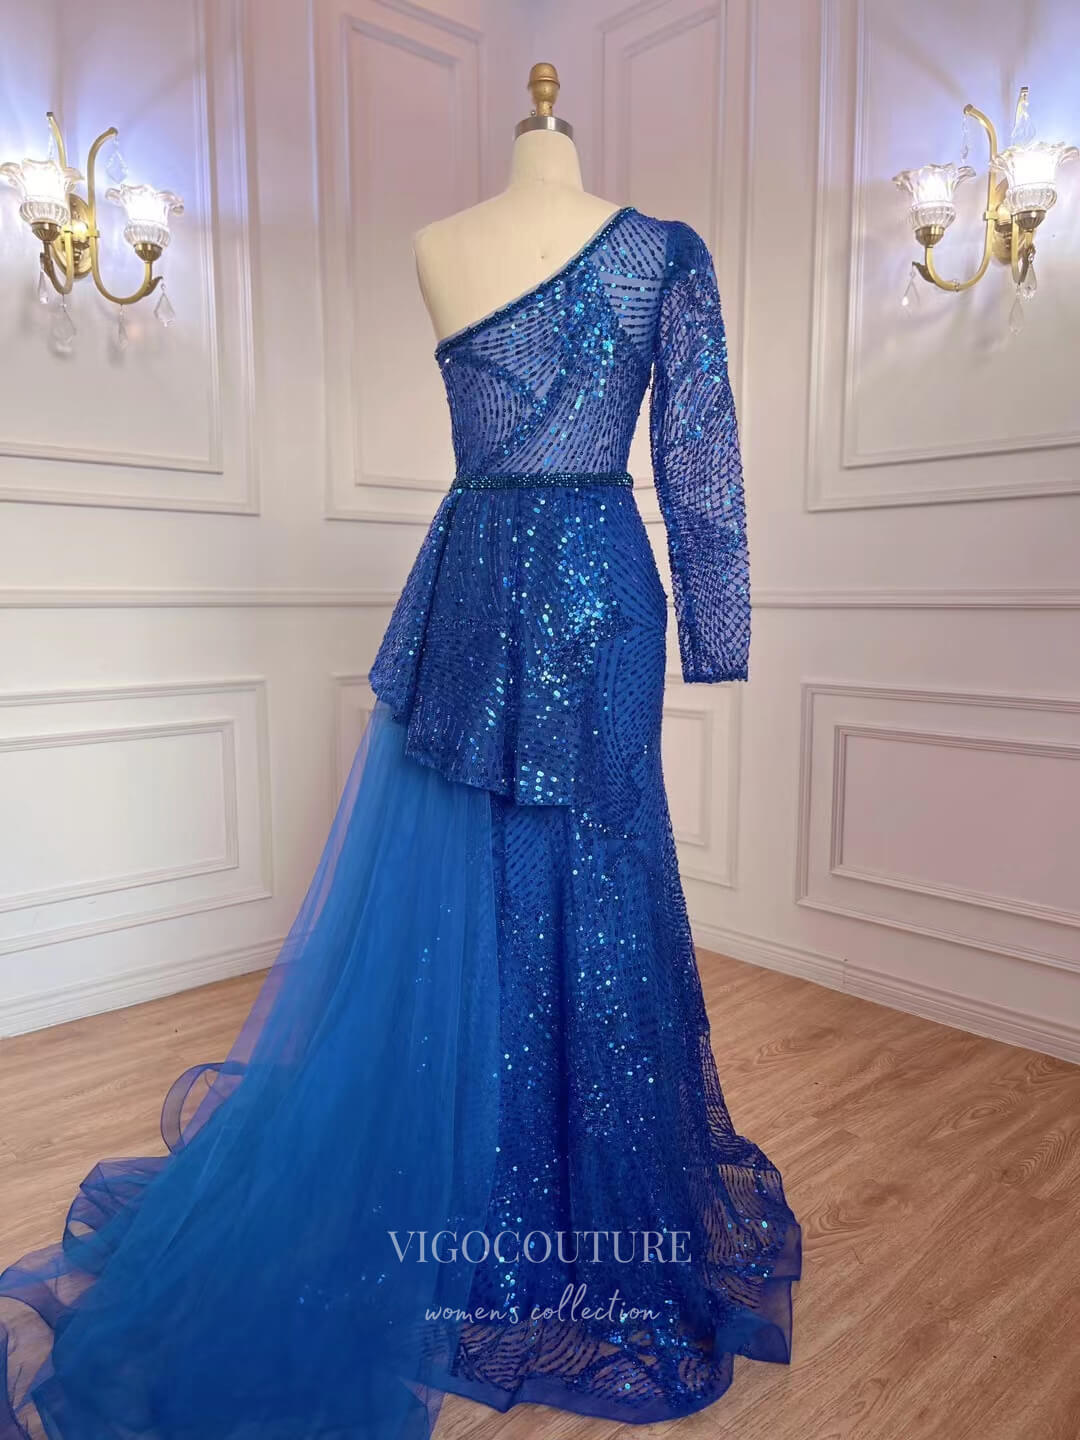 Beaded Sequin Prom Dresses with Slit One Shoulder Evening Gown 22115-Prom Dresses-vigocouture-Champagne-US2-vigocouture